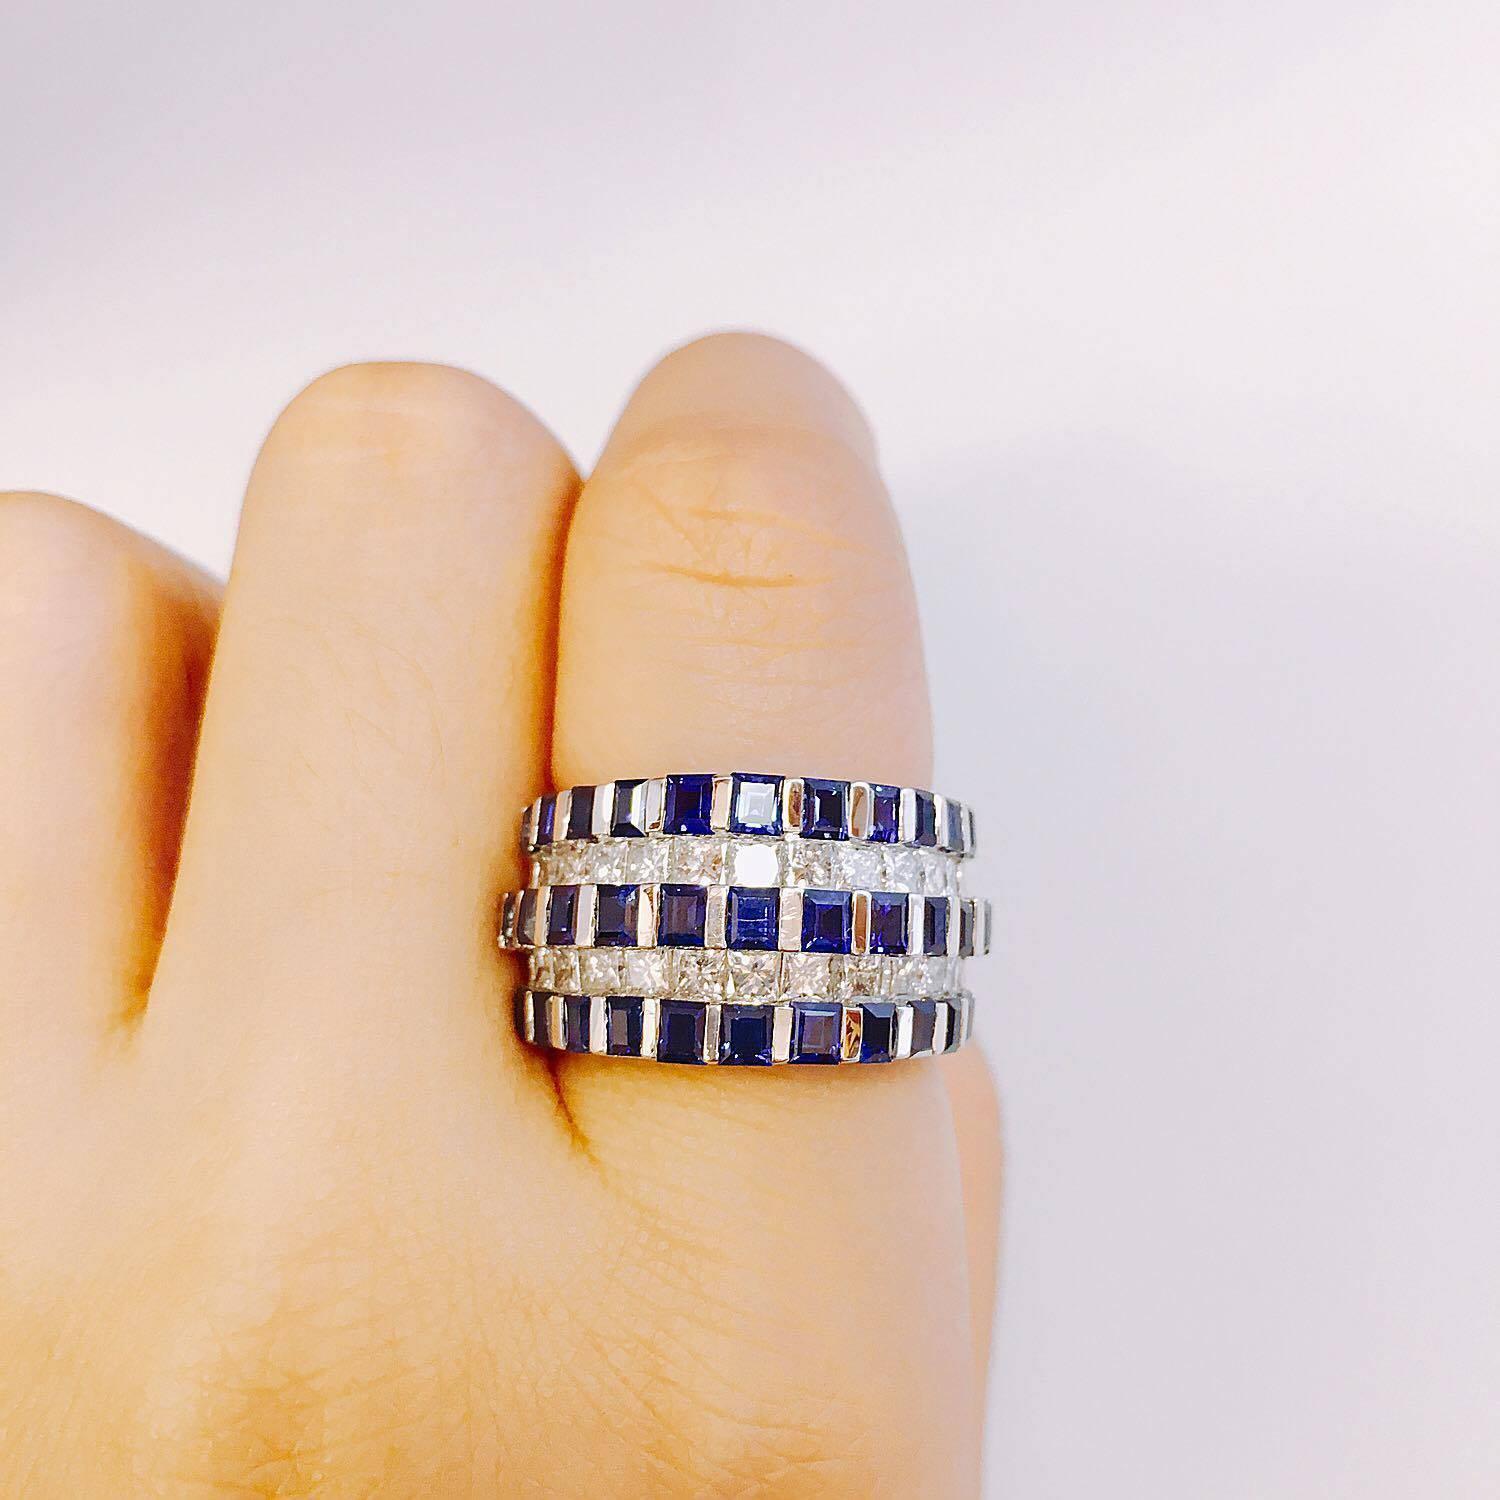 Approx total weight: 1.90cts
Diamond Color: E-F
Diamond Clarity: Vs 
Cut: Excellent 
Sapphire Color: Rich Blue 
Please include your ring size we will size before shipping at no additional cost to you. 
All Emilio! pieces come with a professional